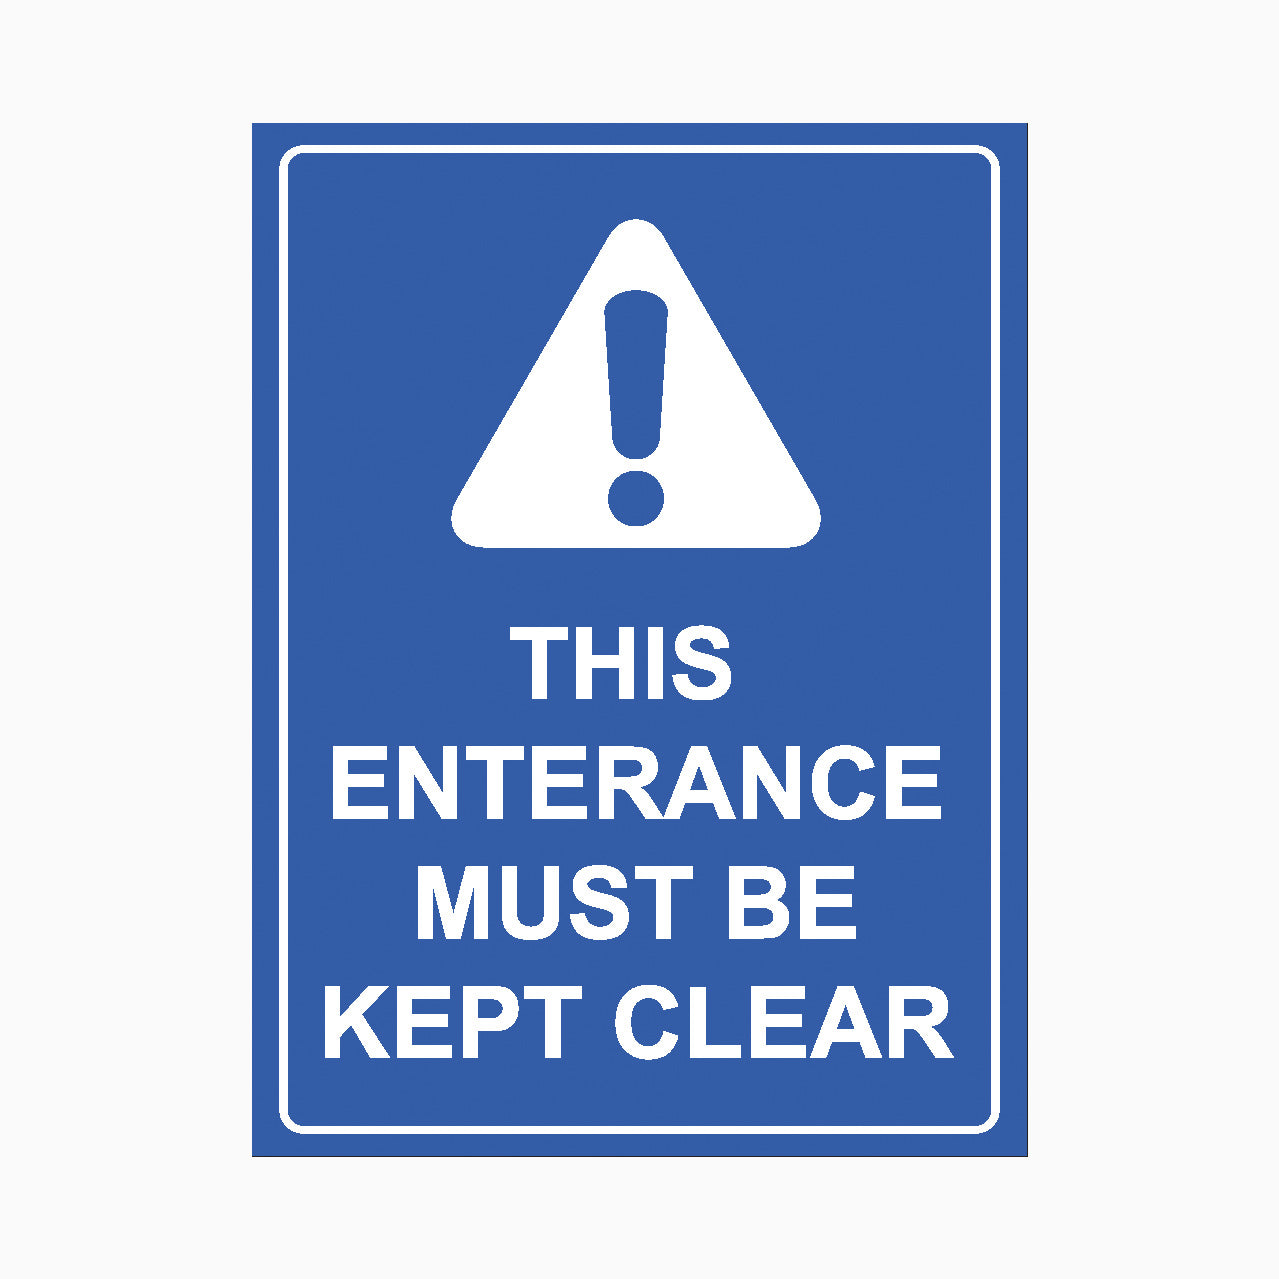 THIS ENTRANCE MUST BE KEPT CLEAR SIGN